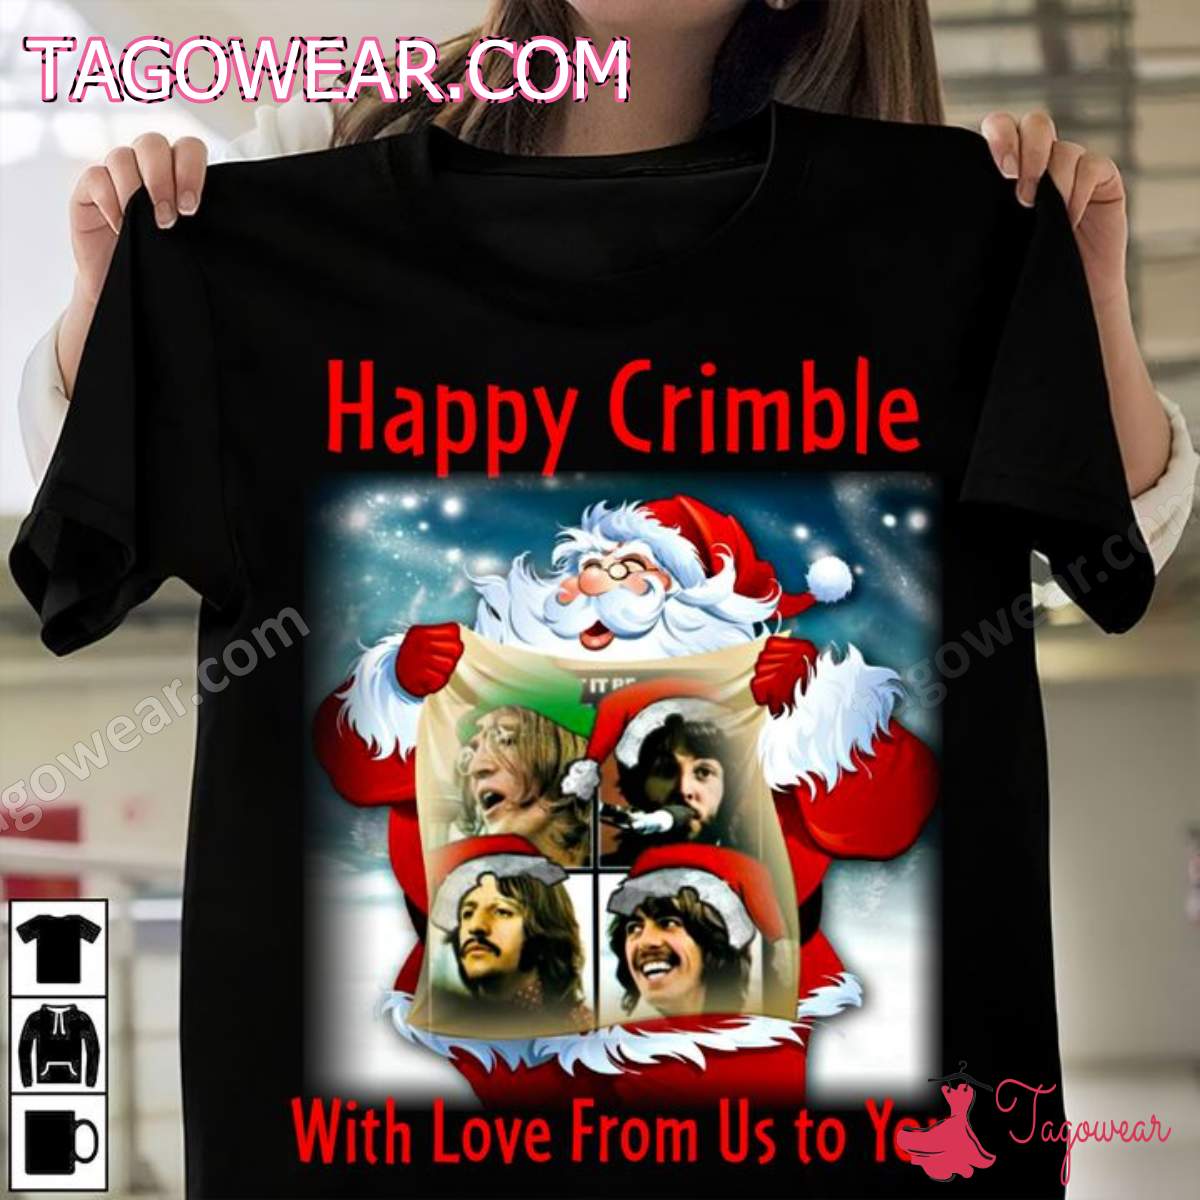 Happy Crimble With Love From Us To You Shirt